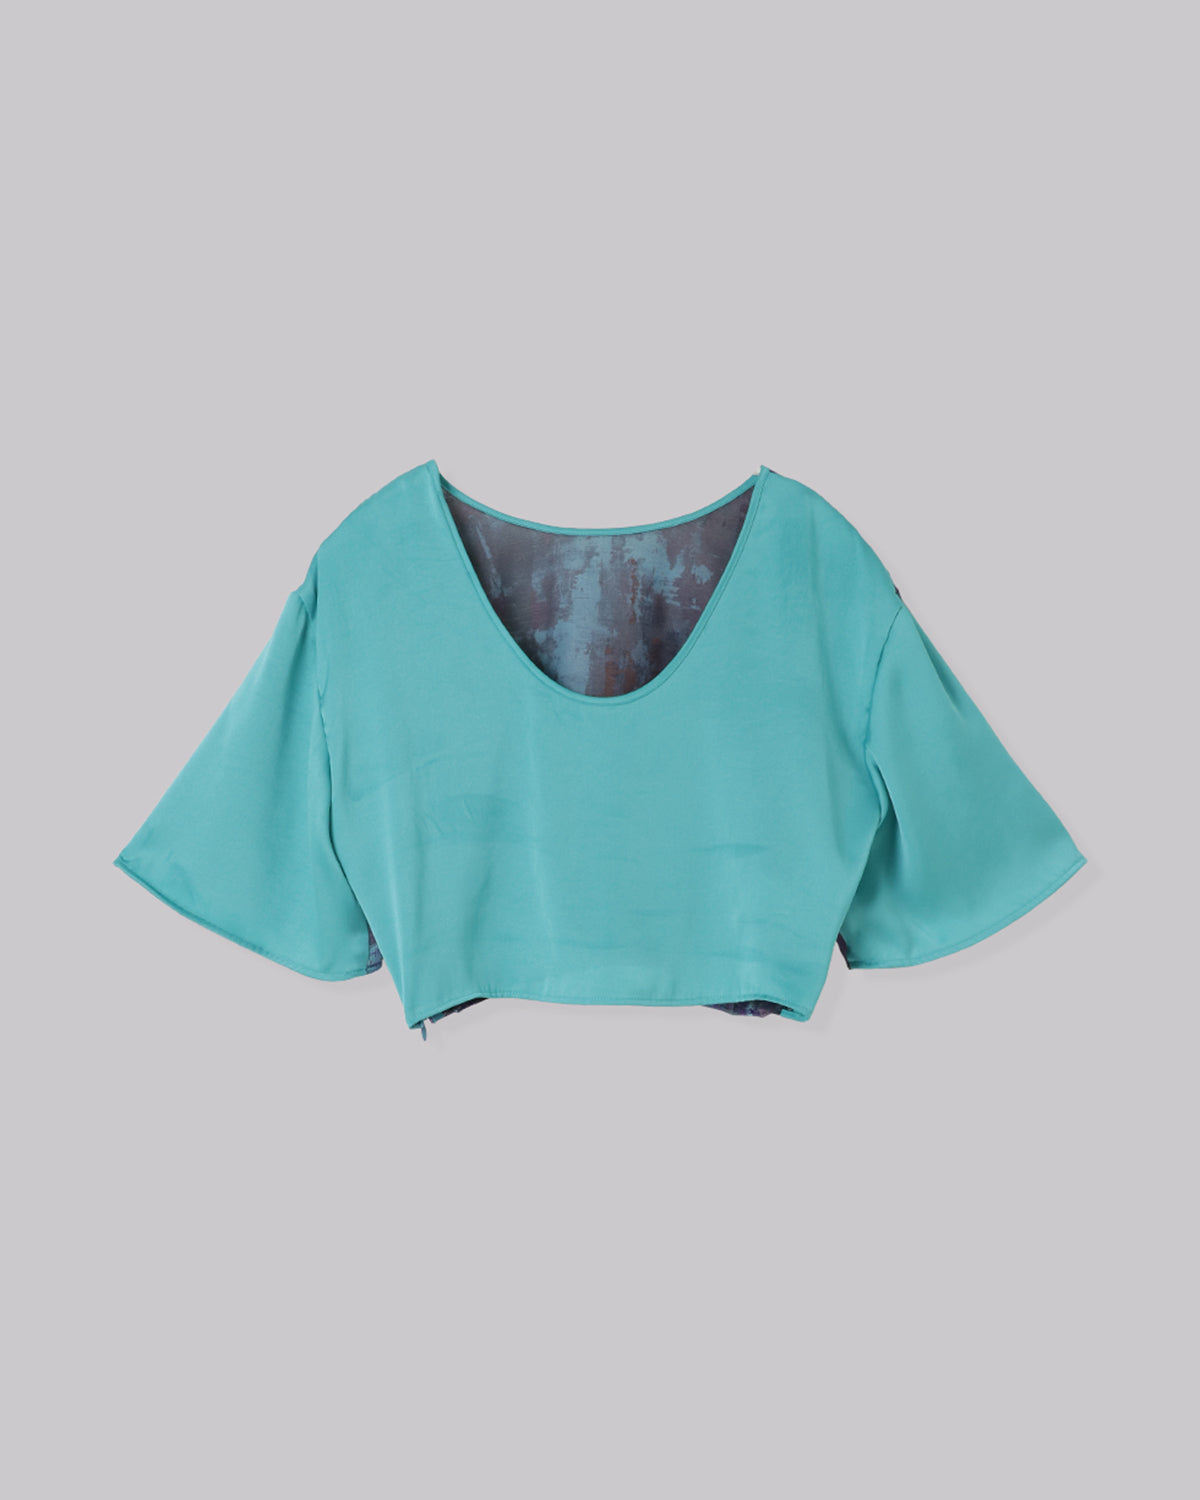 CROPPED MEDITATIVE T-BLOUSE【受注終了】 | ARCHIVE | STORE | THINGS